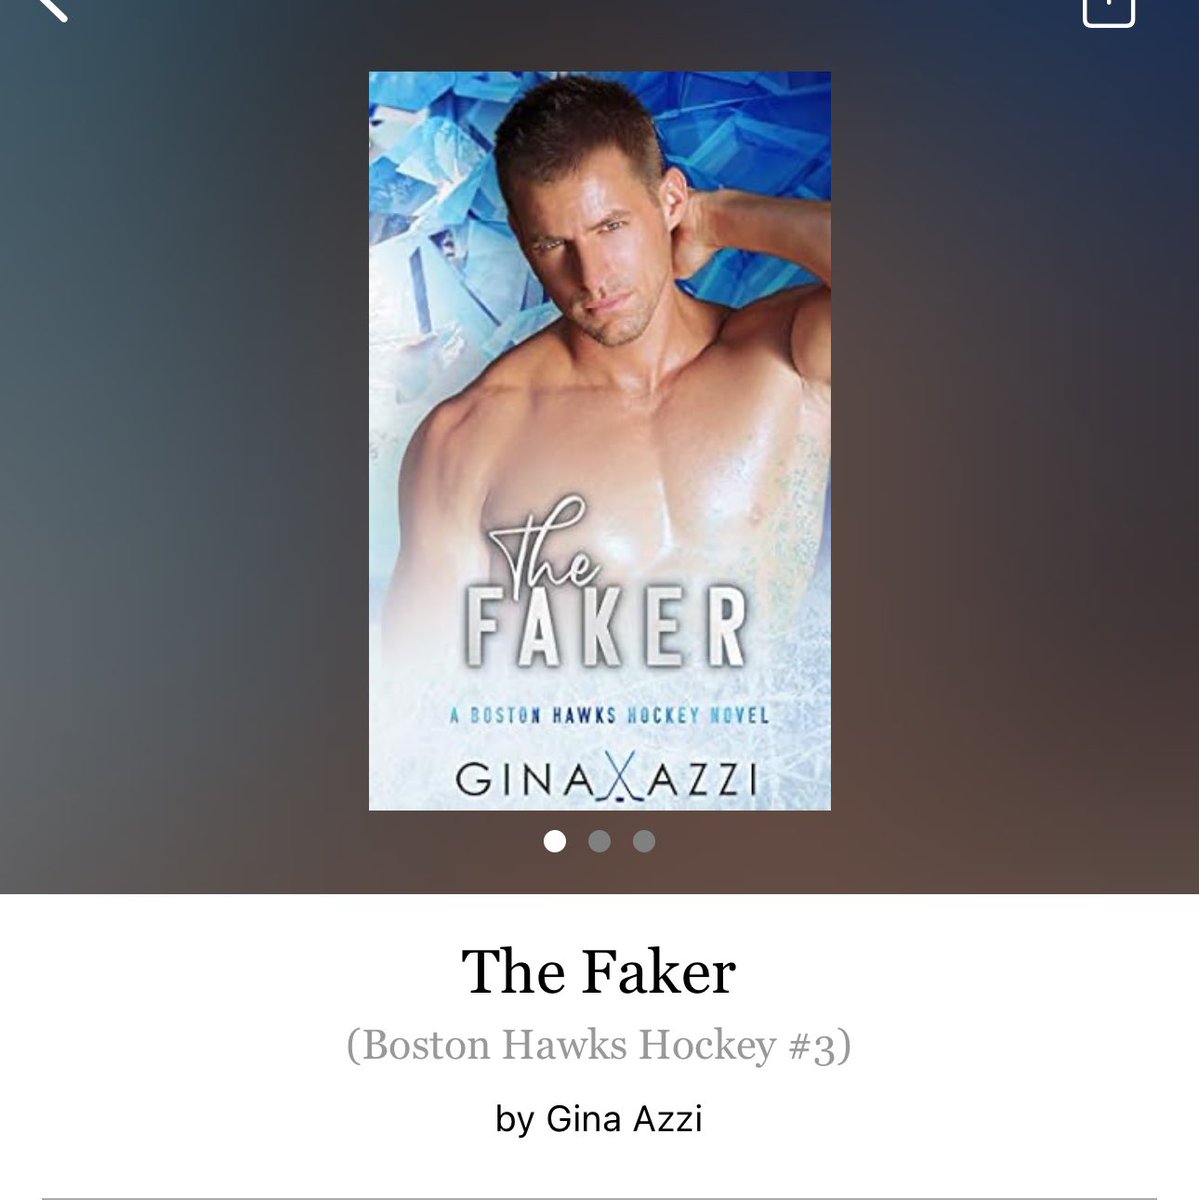 The Faker by Gina Azzi 

#TheFaker by #GinaAzzi #6279 #24chapters #248pages #428of400 #Audiobook #hoopla #65for17 #series #BostonHawkesHockeySeries #Book3of9 #7houraudiobook #TorstenAndRielle #april2024 #clearingoffreadingshelves #whatsnext #readitquick